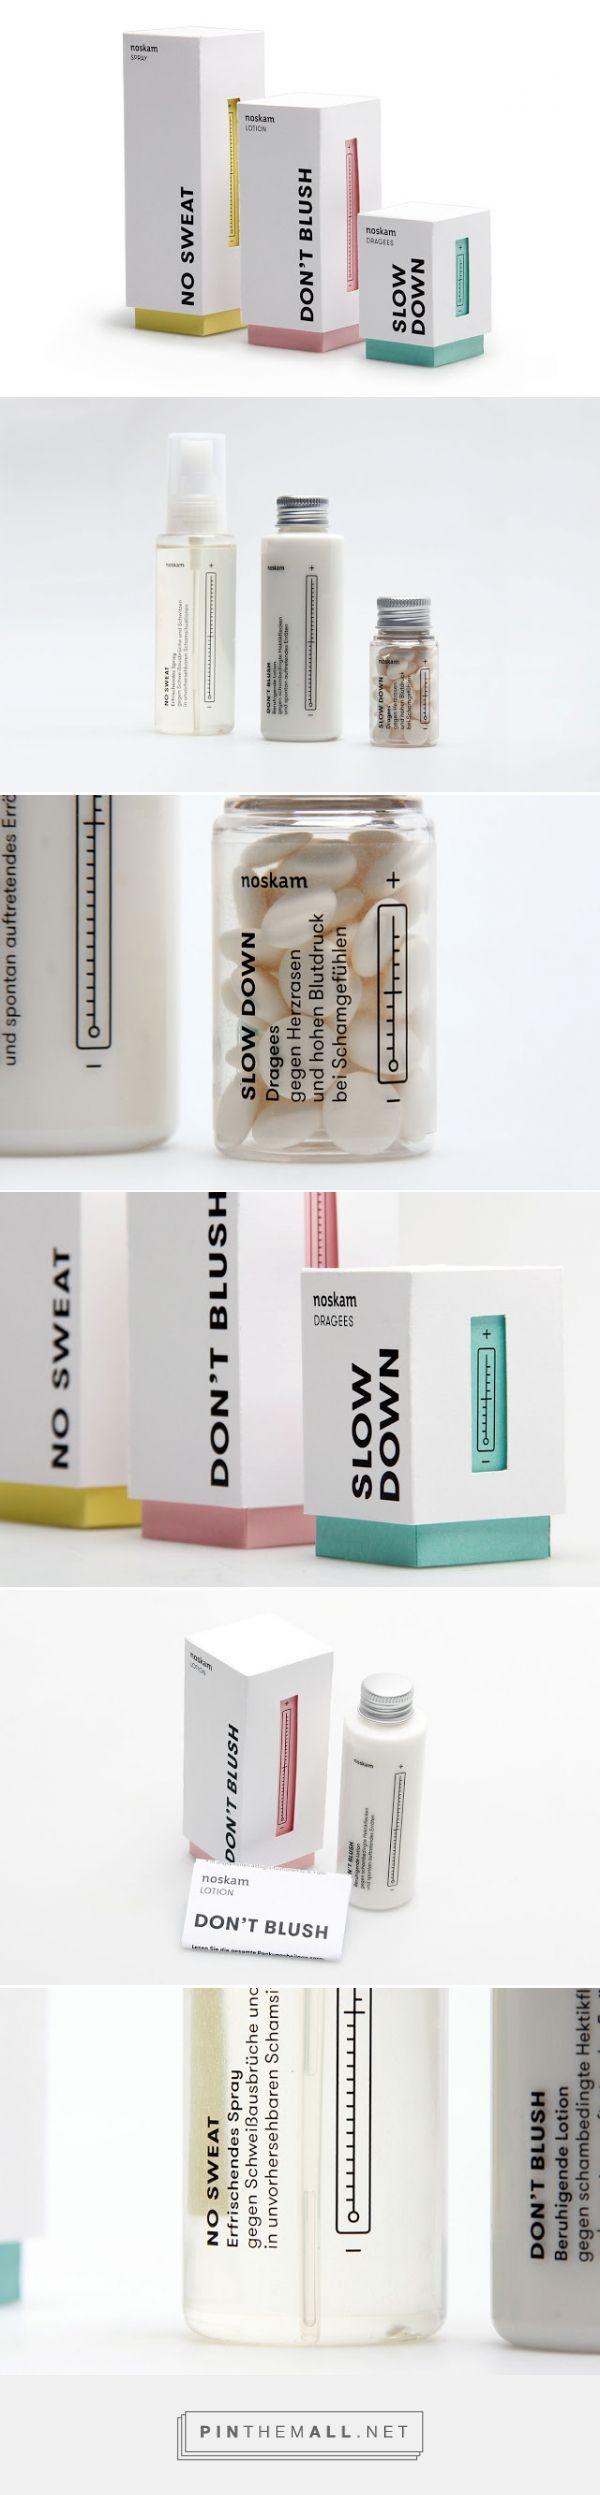 Свадьба - Noskam Student Packaging Concept Designed By Muskat (Germany) - Http://www.packagingoftheworld.com/2016/01/noskam-student-project.html... - A Grouped Images Picture